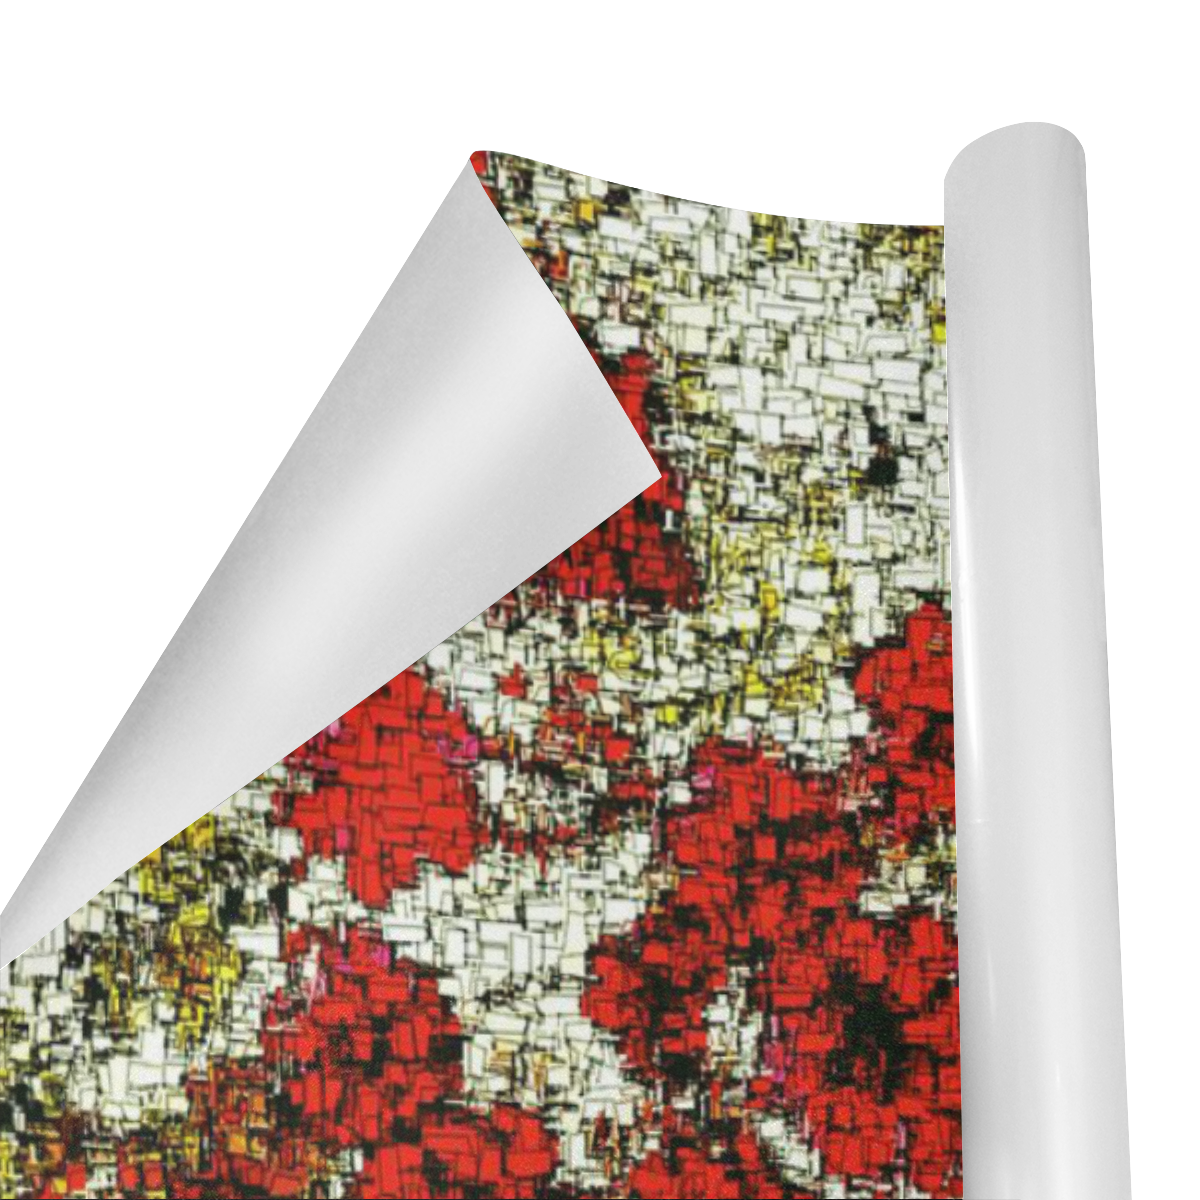 MosaicArt lovely  floral by JamColors Gift Wrapping Paper 58"x 23" (2 Rolls)